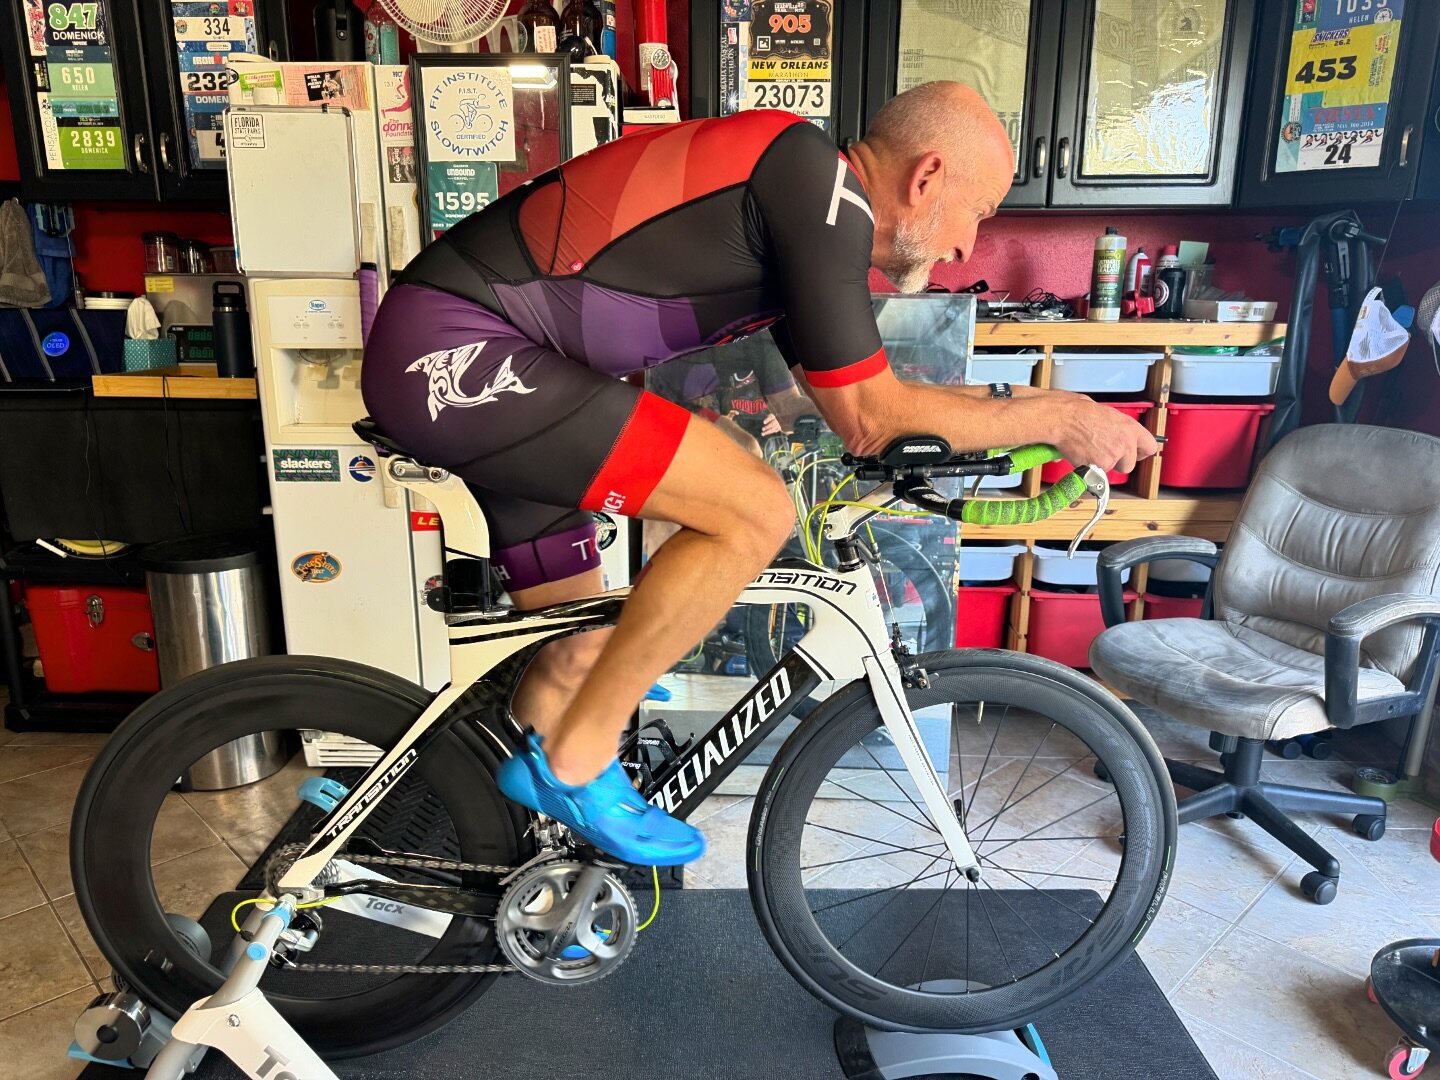 Watch out world Steve @three_socks is already a blazing fast runner but now that he has a great #bikefit he&rsquo;s going to start blowing past you a lot earlier!
#triposse #tpc #finishstrong #tricoaching  #purplepower #triathlon #adventureracing #gr